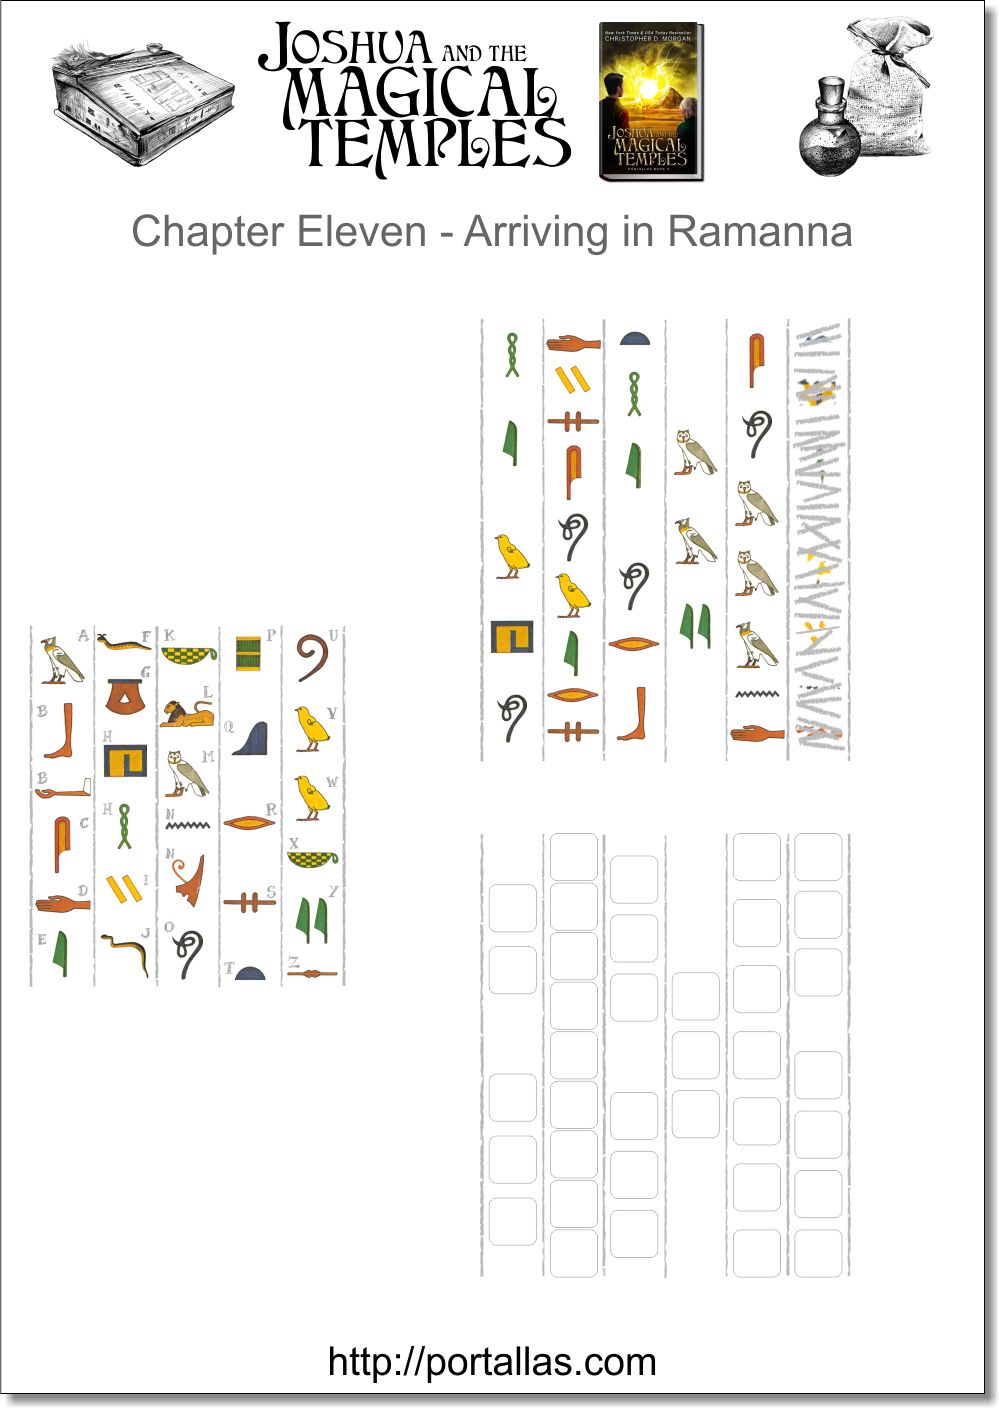 Chapter Eleven - Arriving in Ramanna